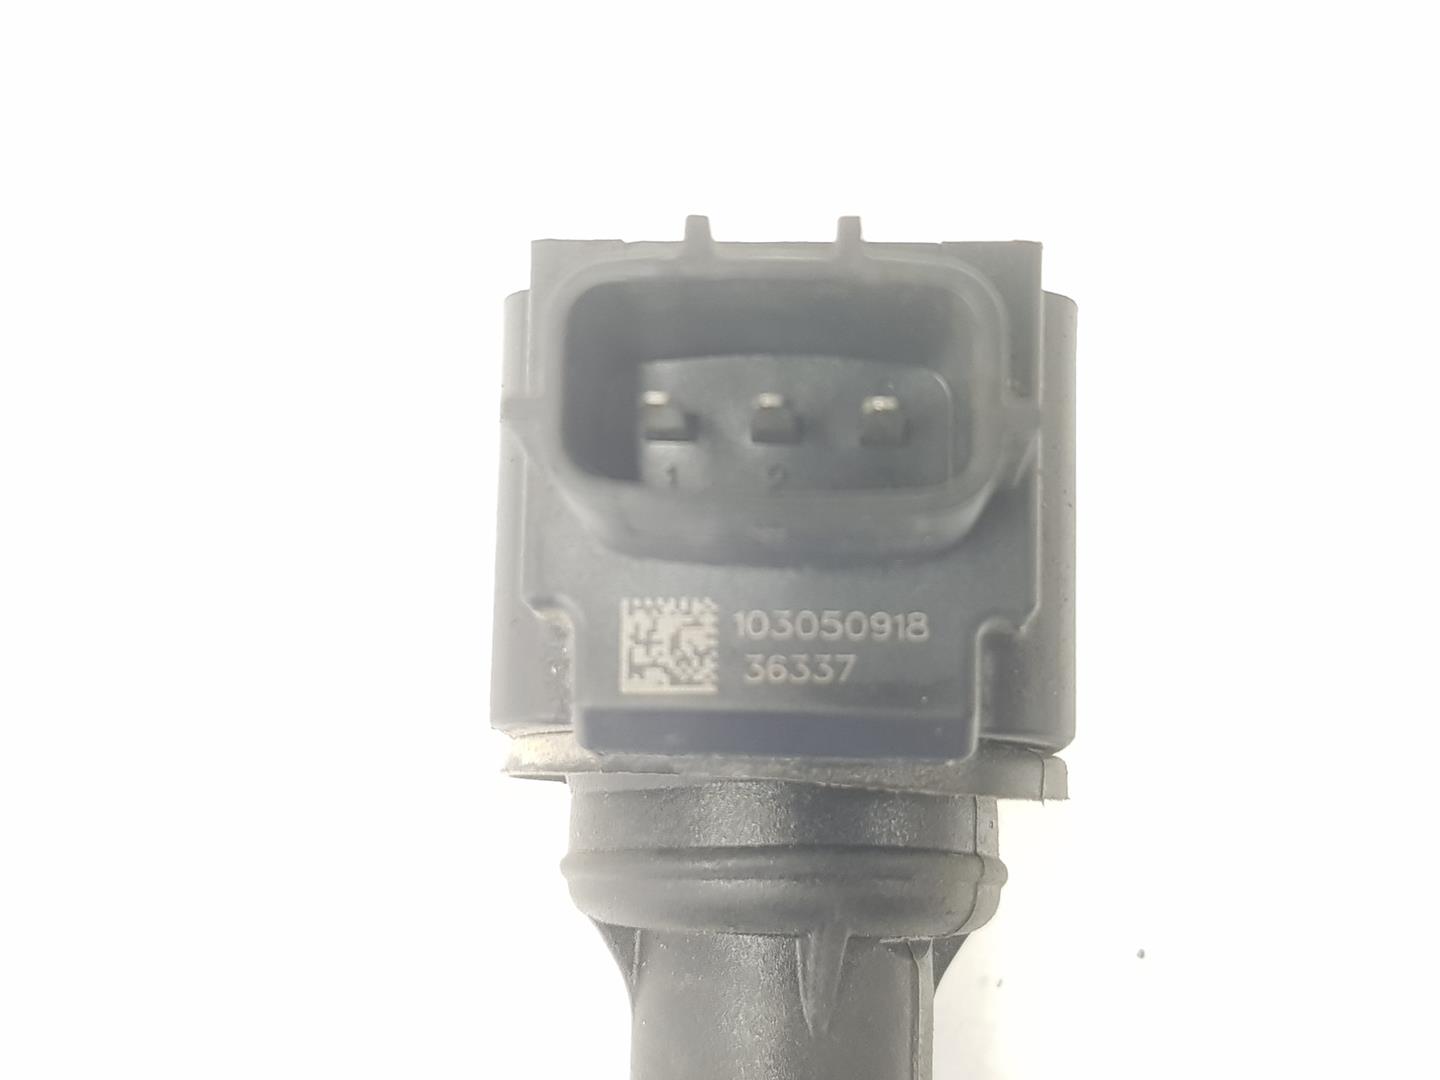 RENAULT Twingo 3 generation (2014-2023) High Voltage Ignition Coil 224332428R, 224332428R, 1151CB 21694053